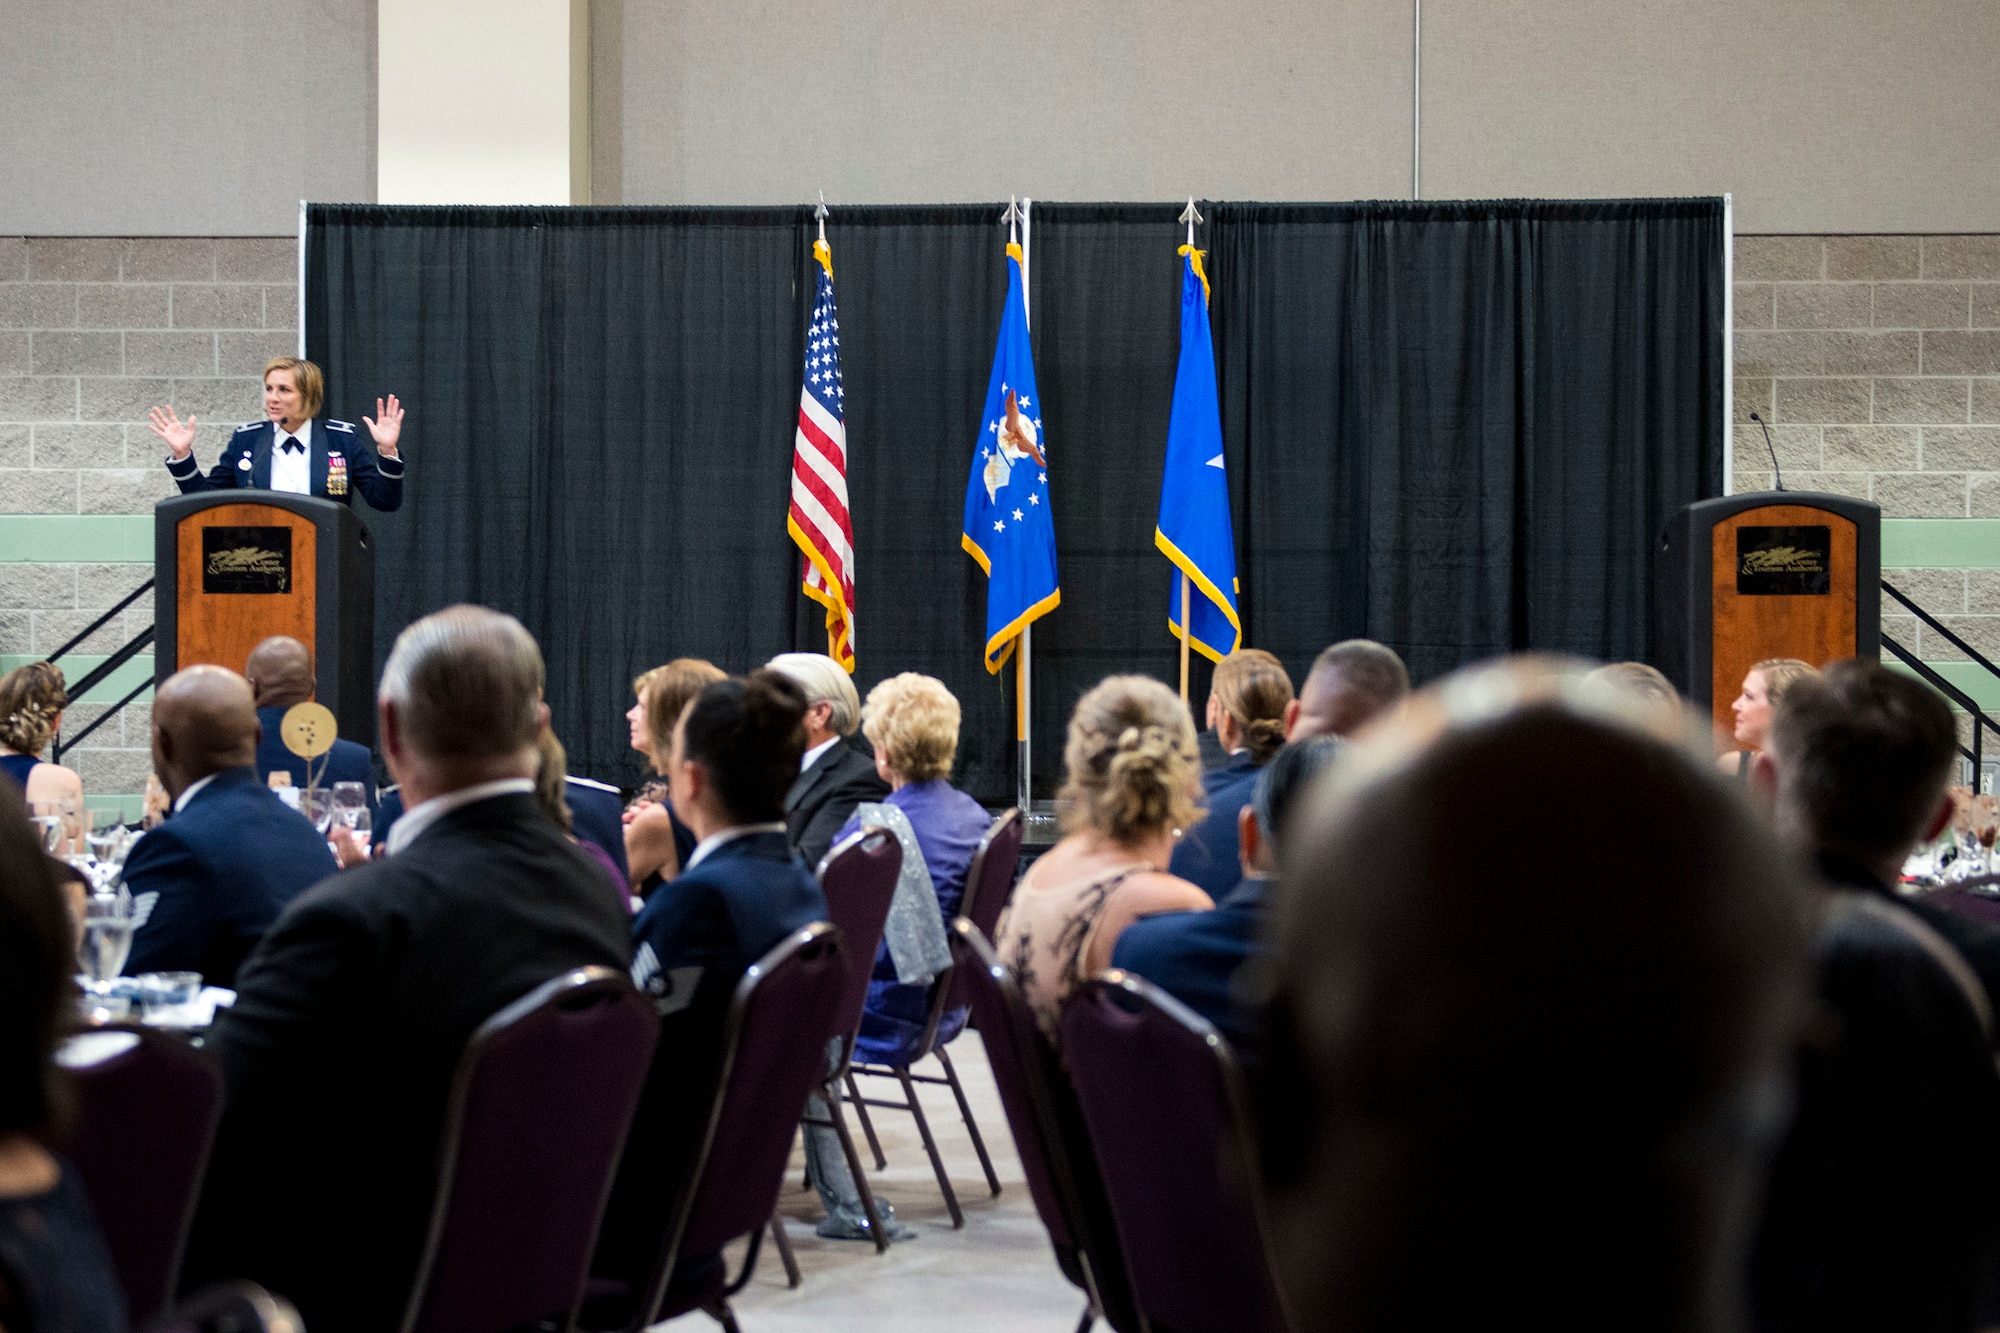 Col. Jennifer Short, 23d Wing commander, gives opening remarks during the Air Force Ball, Sept. 15, 2018, at the James H. Rainwater Conference Center in Valdosta, Ga. Moody’s Air Force Ball was not only a celebration of the Air Force’s 71st Birthday but a way to foster esprit de corps and pride among Airmen through a shared history of exceptional service. (U.S. Air Force photo by Airman 1st Class Erick Requadt)